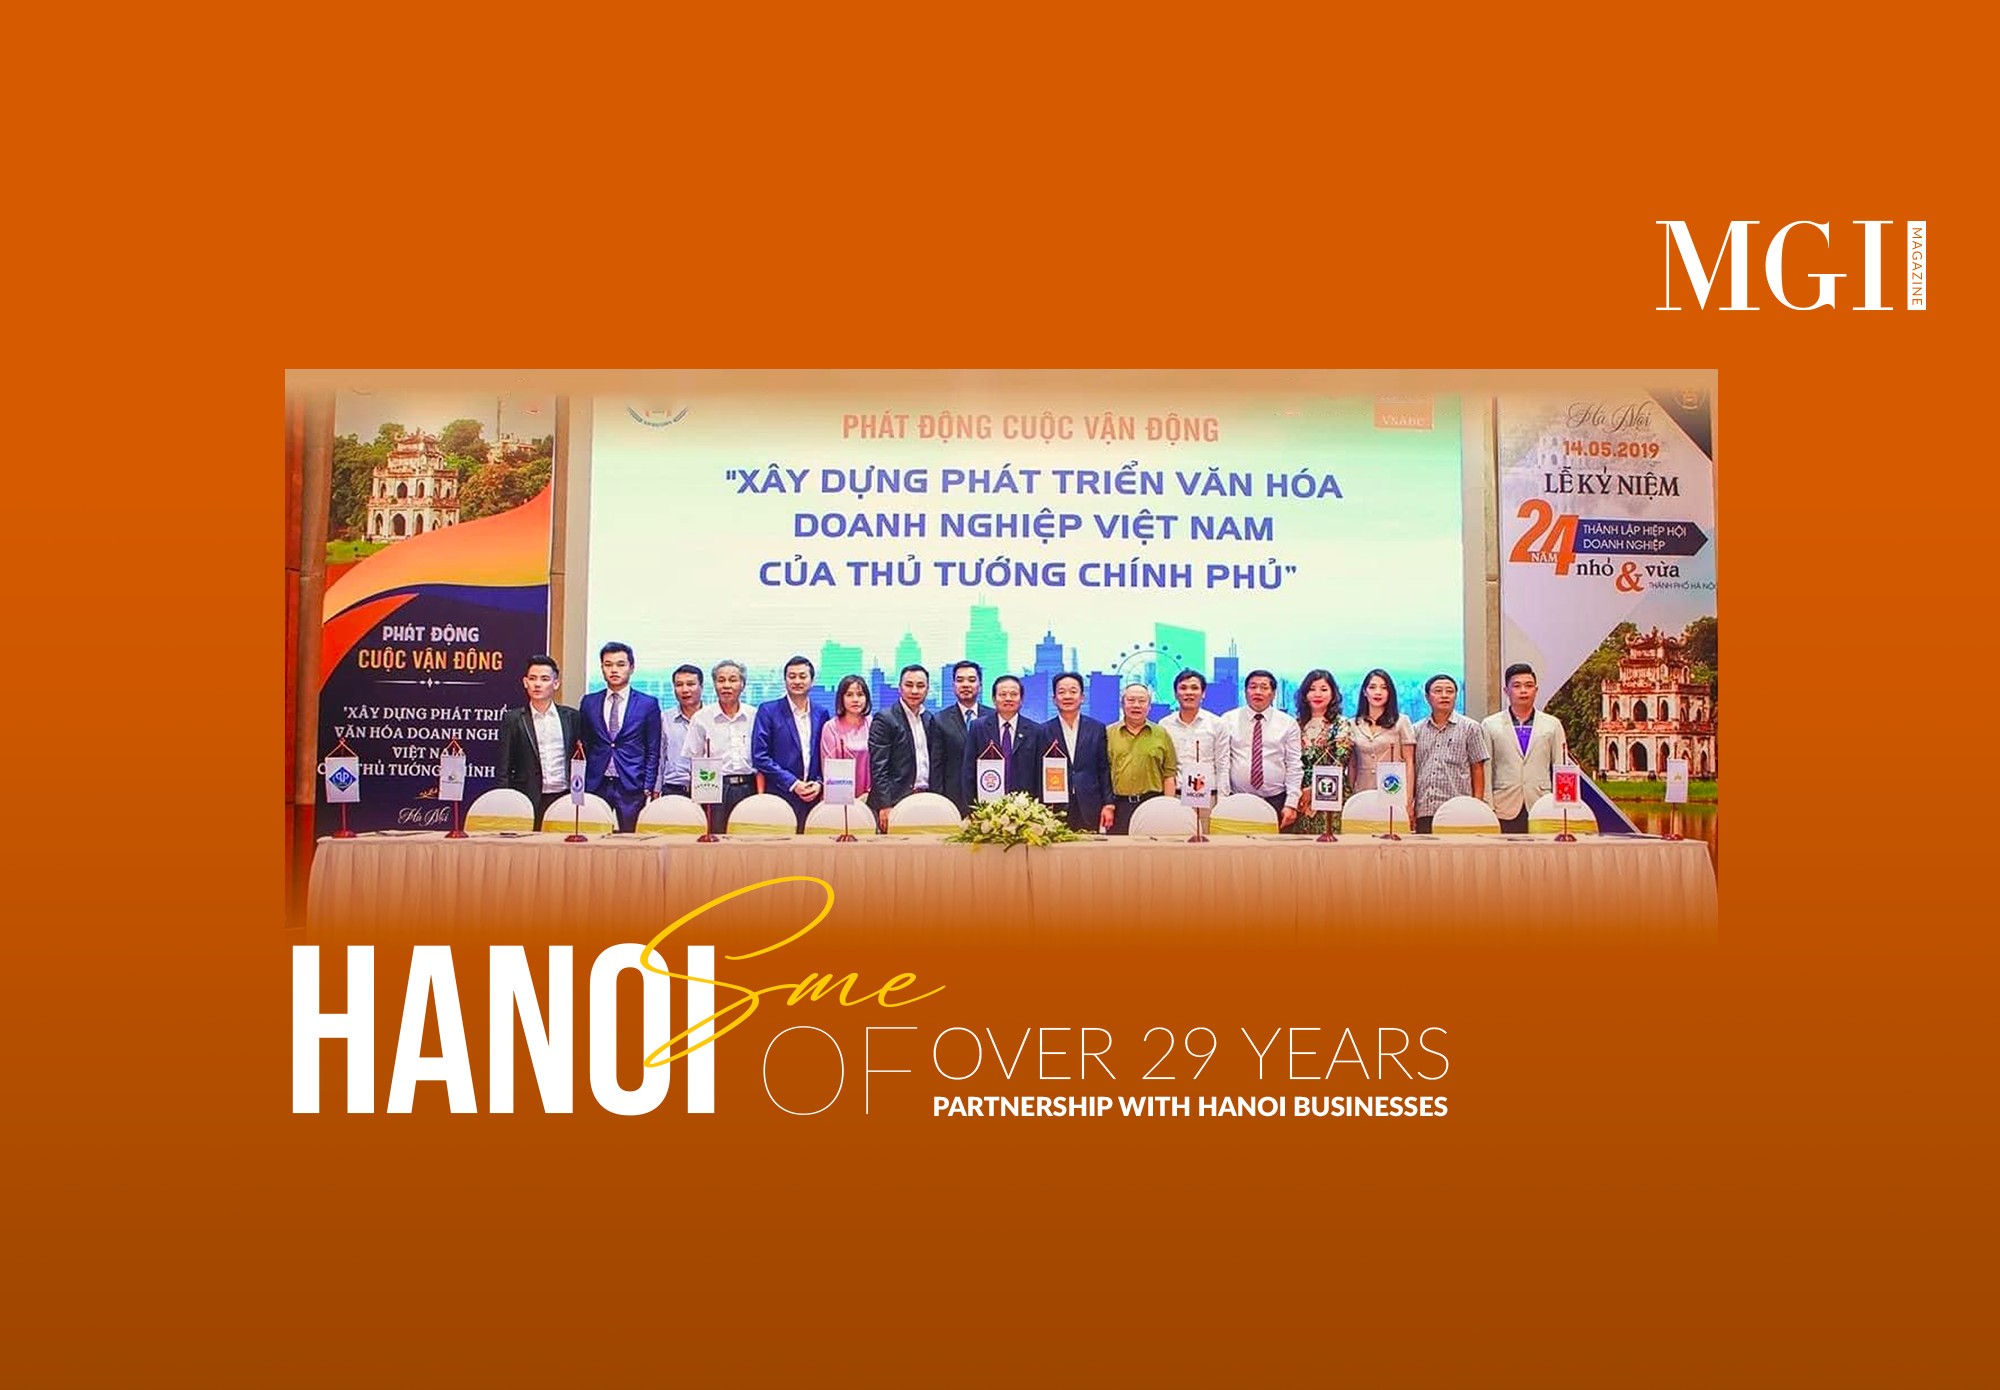 Hanoisme - Over 29 years of partnership with Hanoi businesses